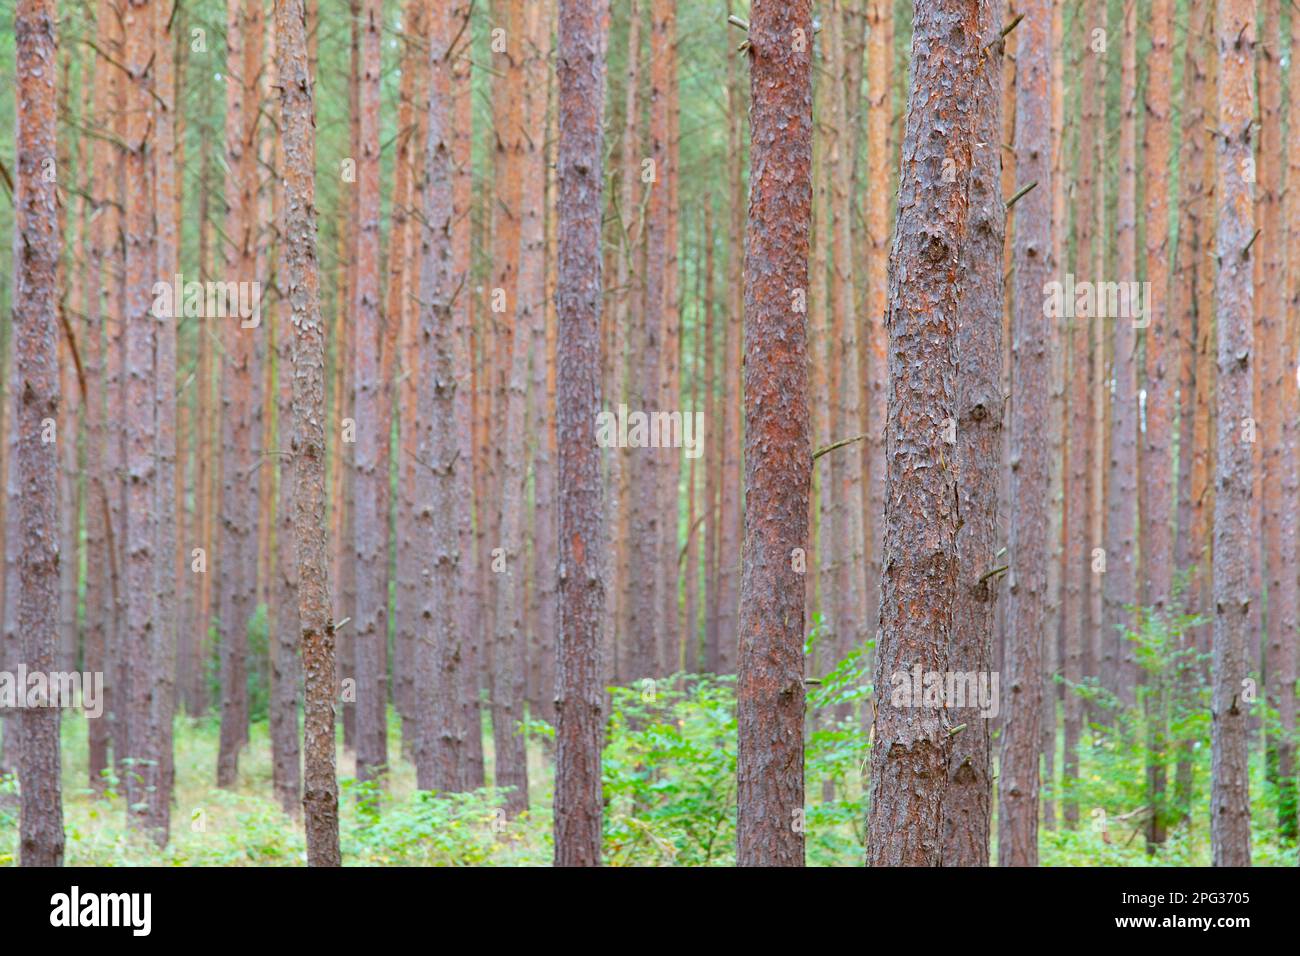 Scots Pine (Pinus sylvestris). Pine trunks close together. Germany Stock Photo